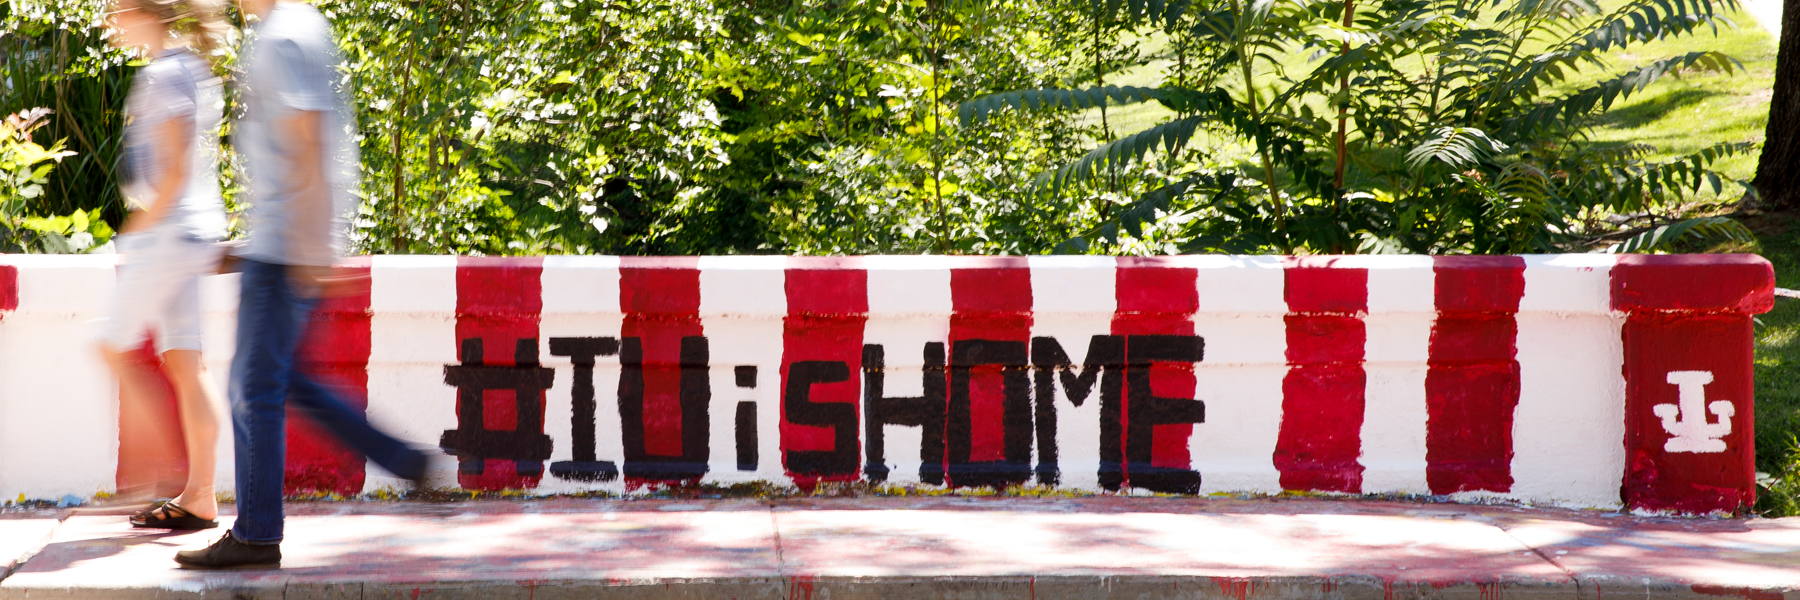 Students walk past a bridge railing painted in red and white stripes and which says #IUisHome.